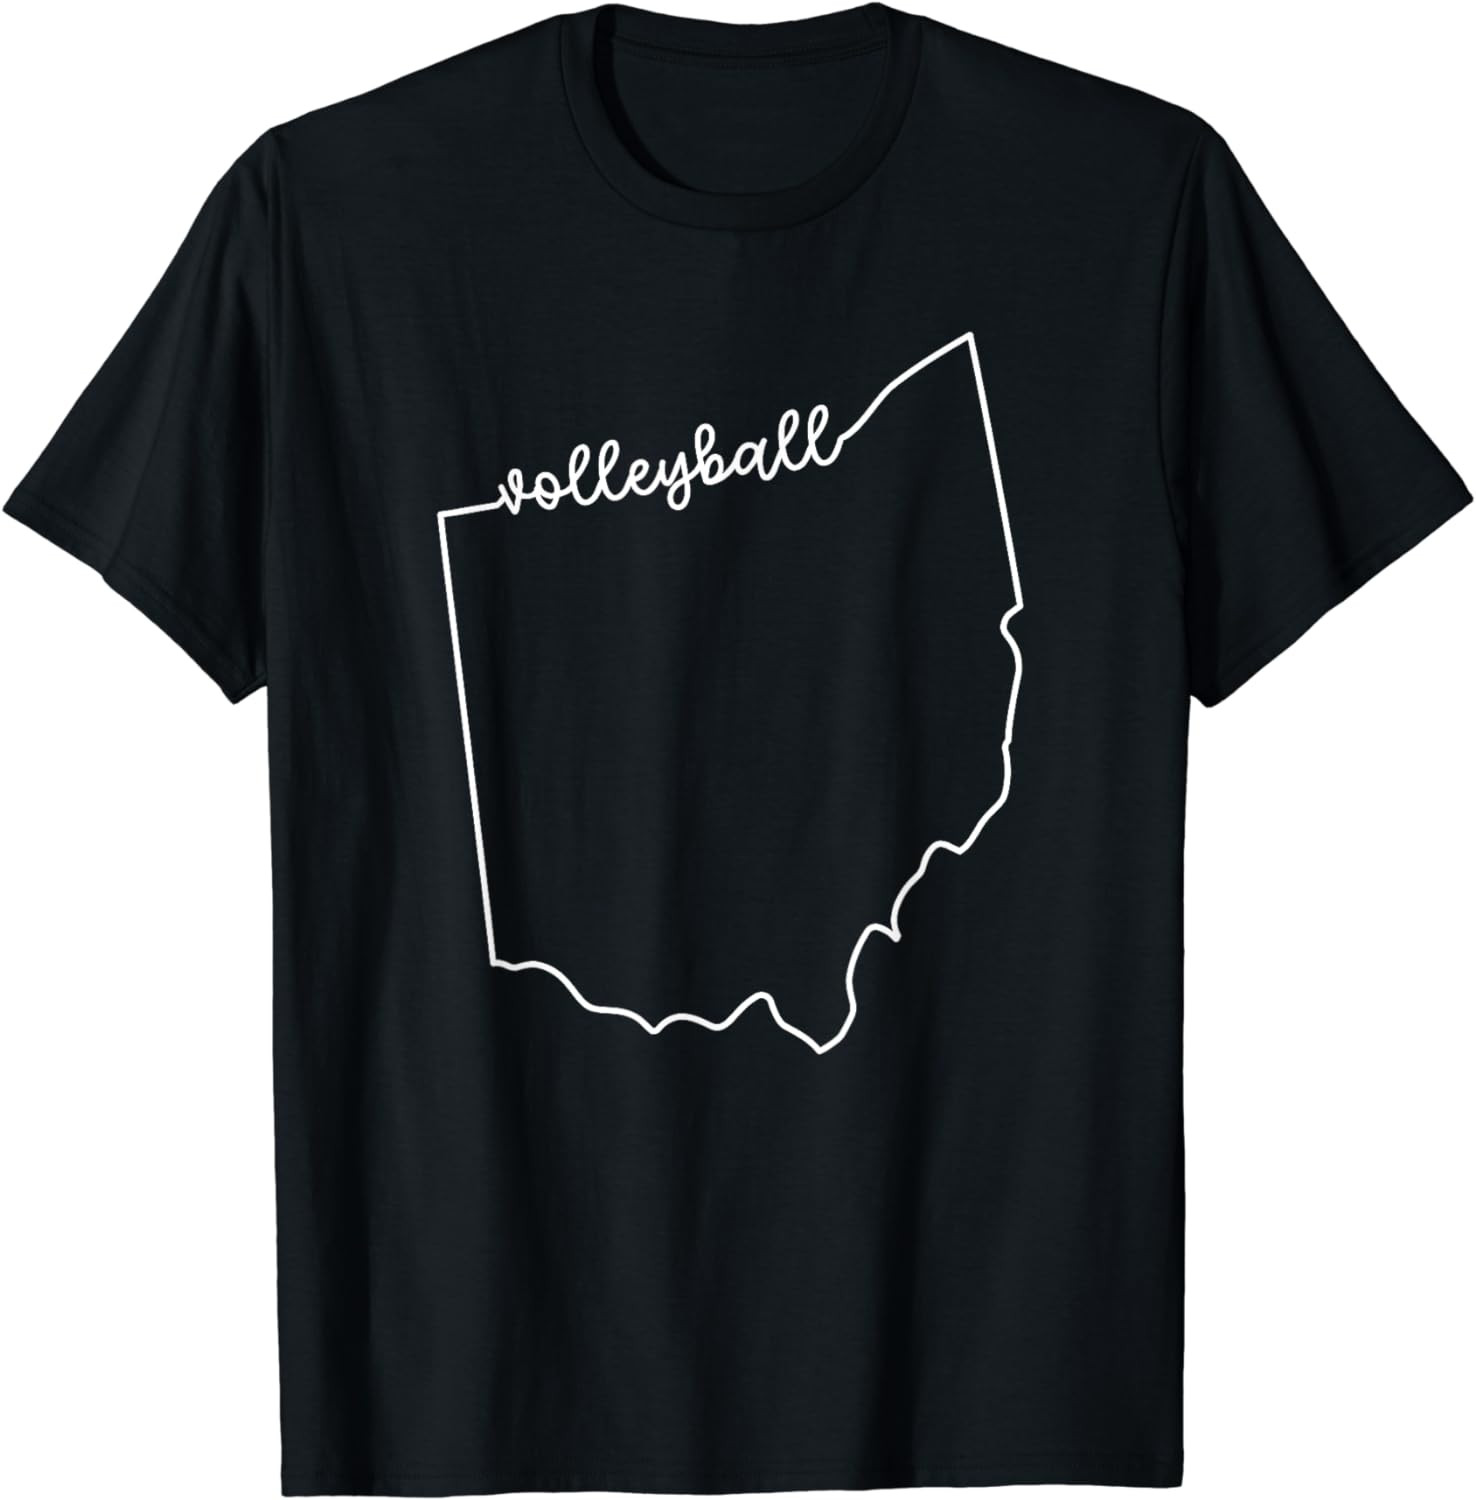 State Of Ohio Outline With Volleyball Script Acj235b T-Shirt